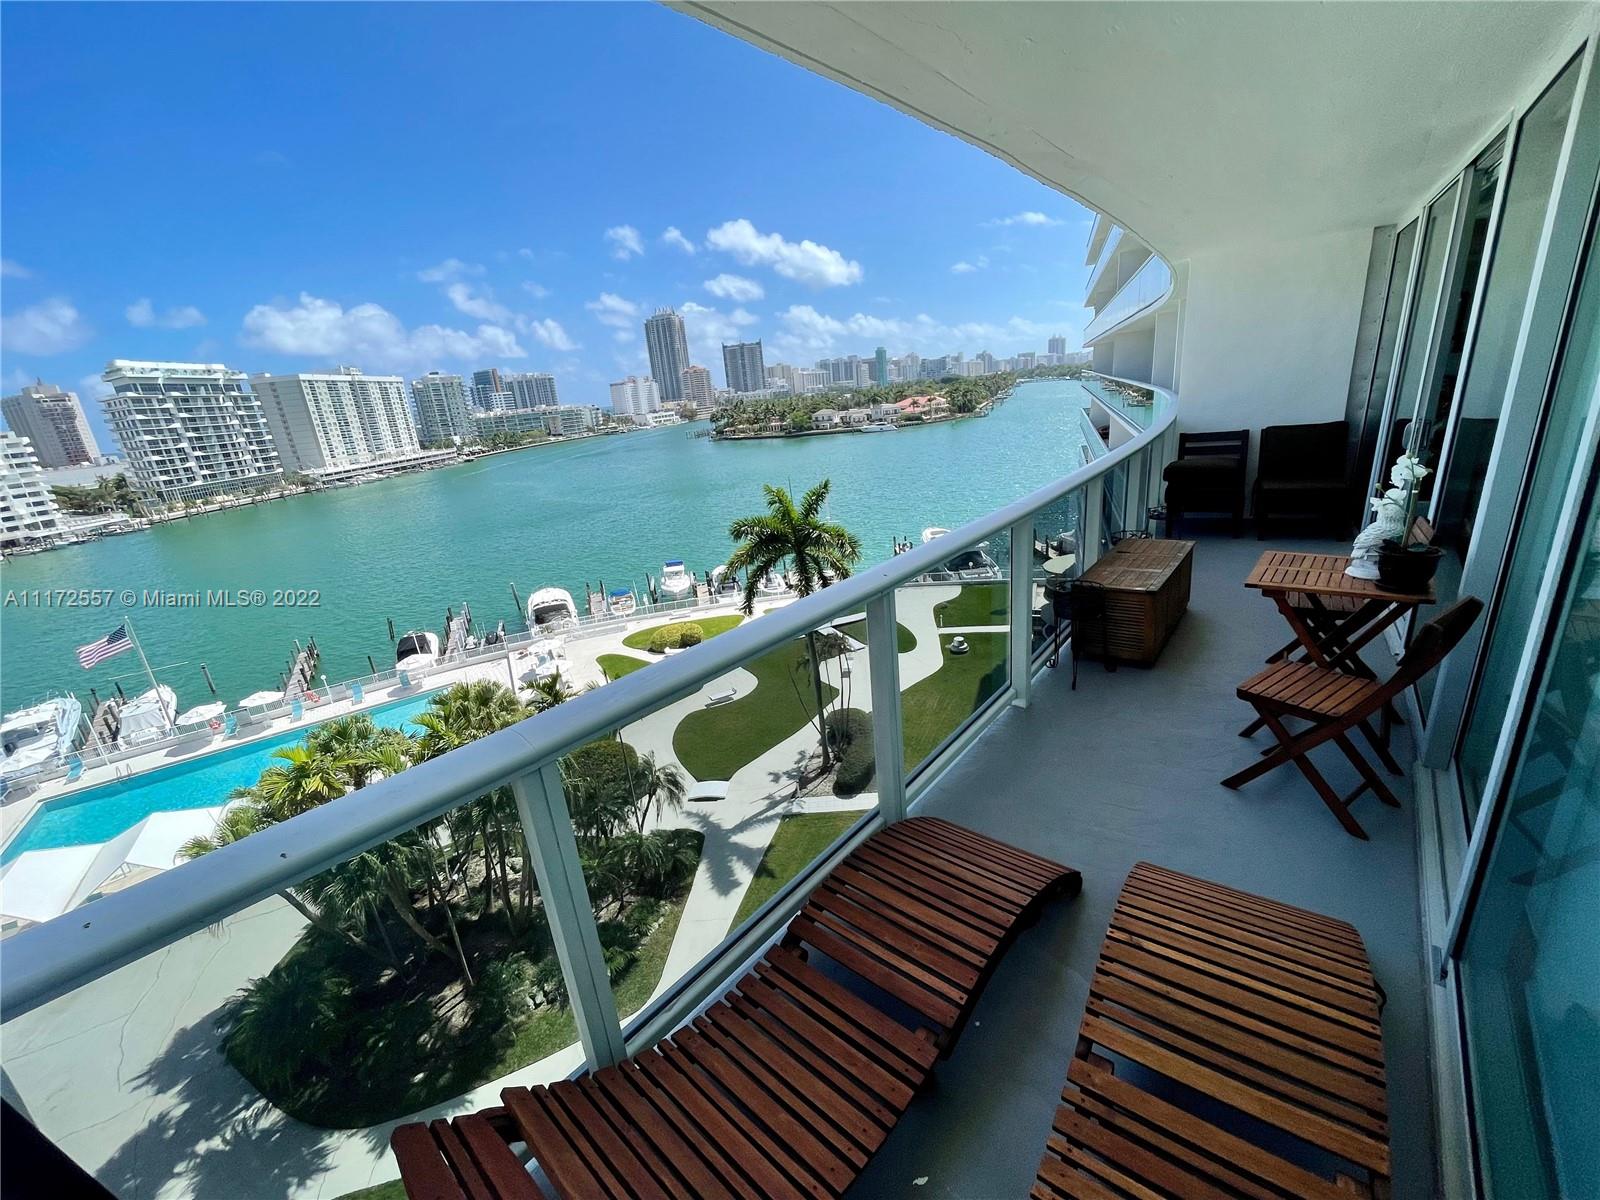 Magnificent high floor with panoramic, intracostal & bay views in the prestigious King Cole building !!! Floor to ceiling glass windows. spacious & luminous New hallways, balconies & docks. Luxury service, doorman & valet 24/7, olympic size heated pool, gym and marina. Maintainance includes all electric, water, internet (250MB) cable TV and one parking space using valet, 2nd car $75 a month. Waking distance to beach, restaurants, supermarkets and shops. Unit has impact windows and electrical shades. It will not last !!! EZ to show !